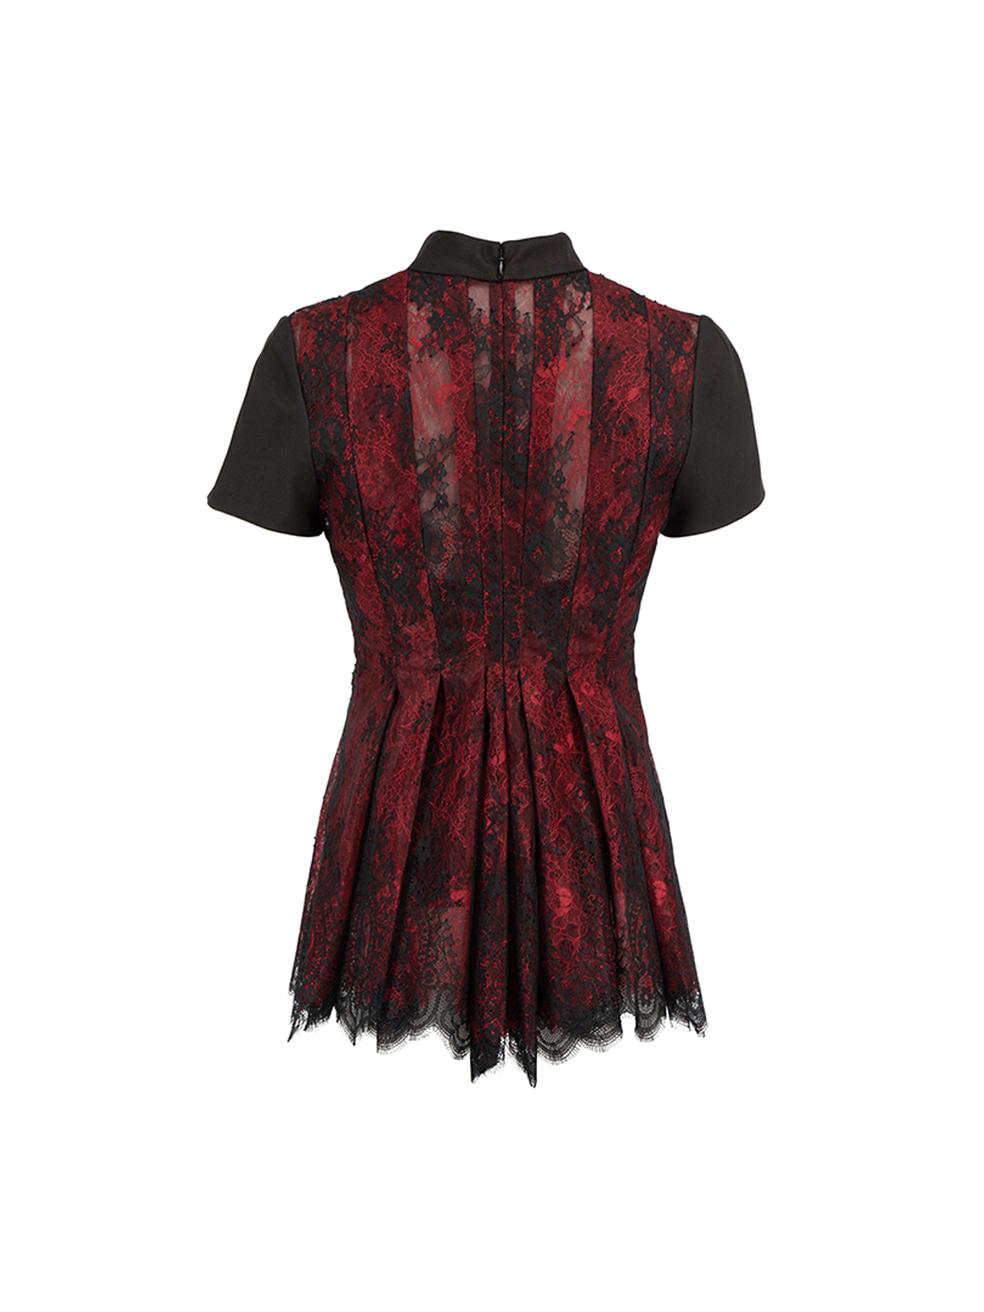 Black Alexander McQueen McQ by Alexander McQueen Red Floral Lace Top Size S